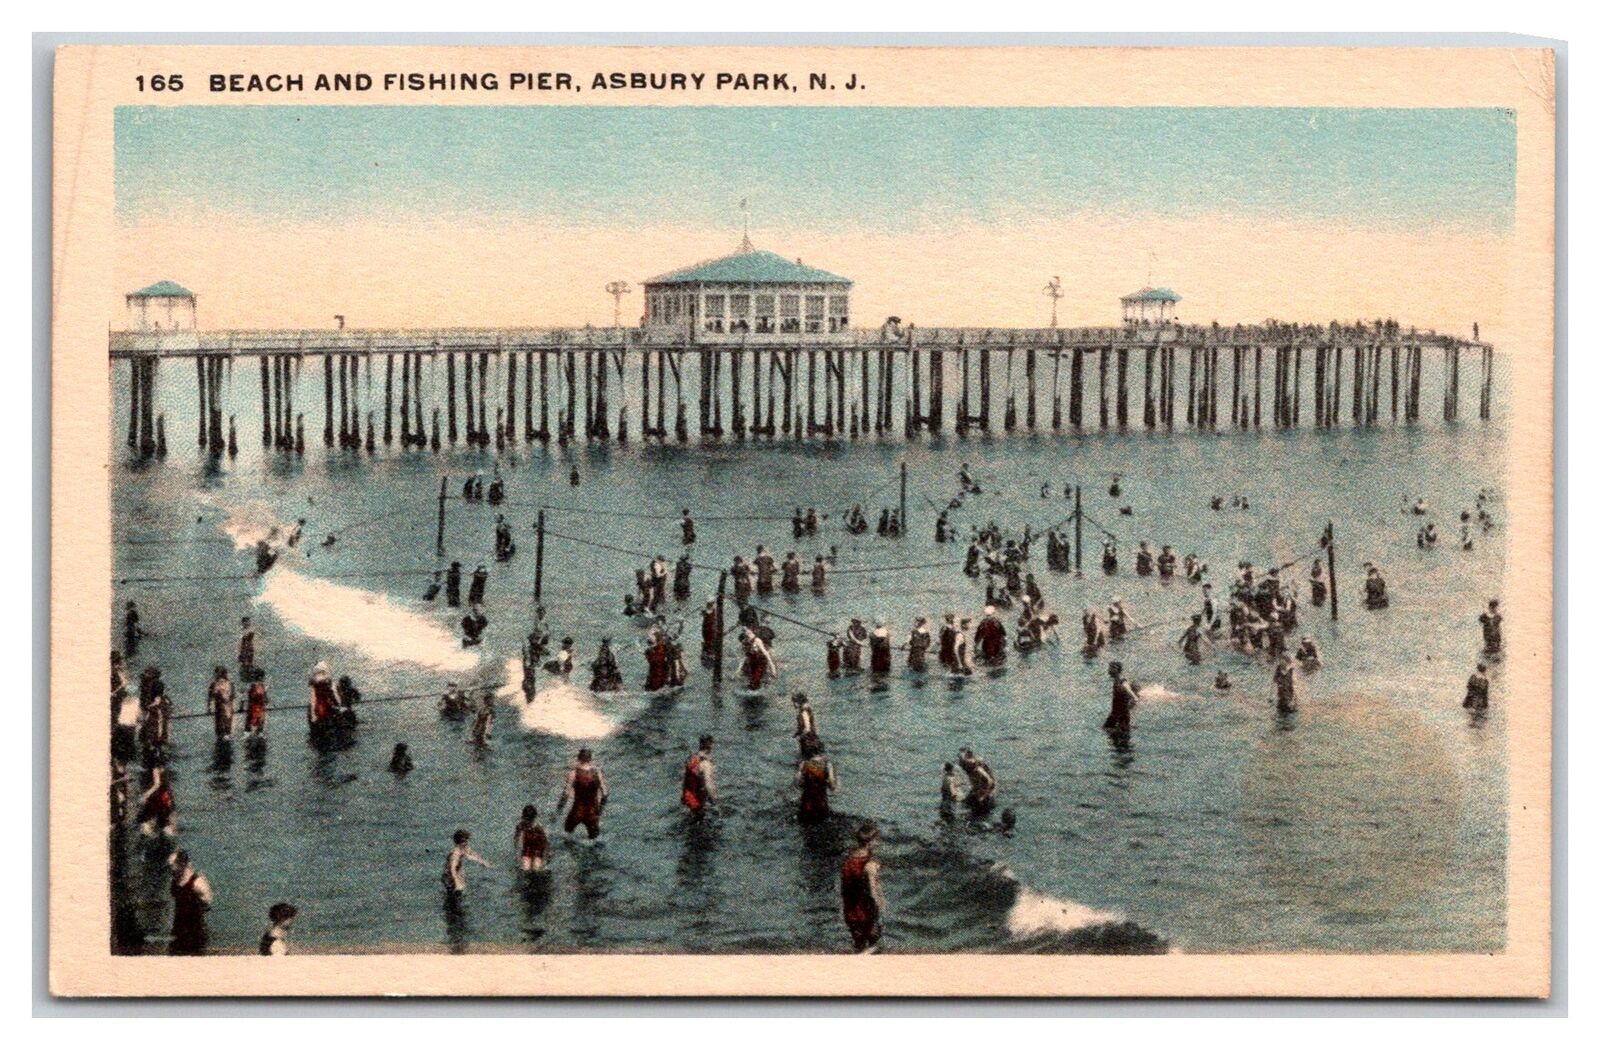 VINTAGE 1920'S BEACH AND FISHING PIER IN ASBURY PARK NEW JERSEY NJ POSTCARD